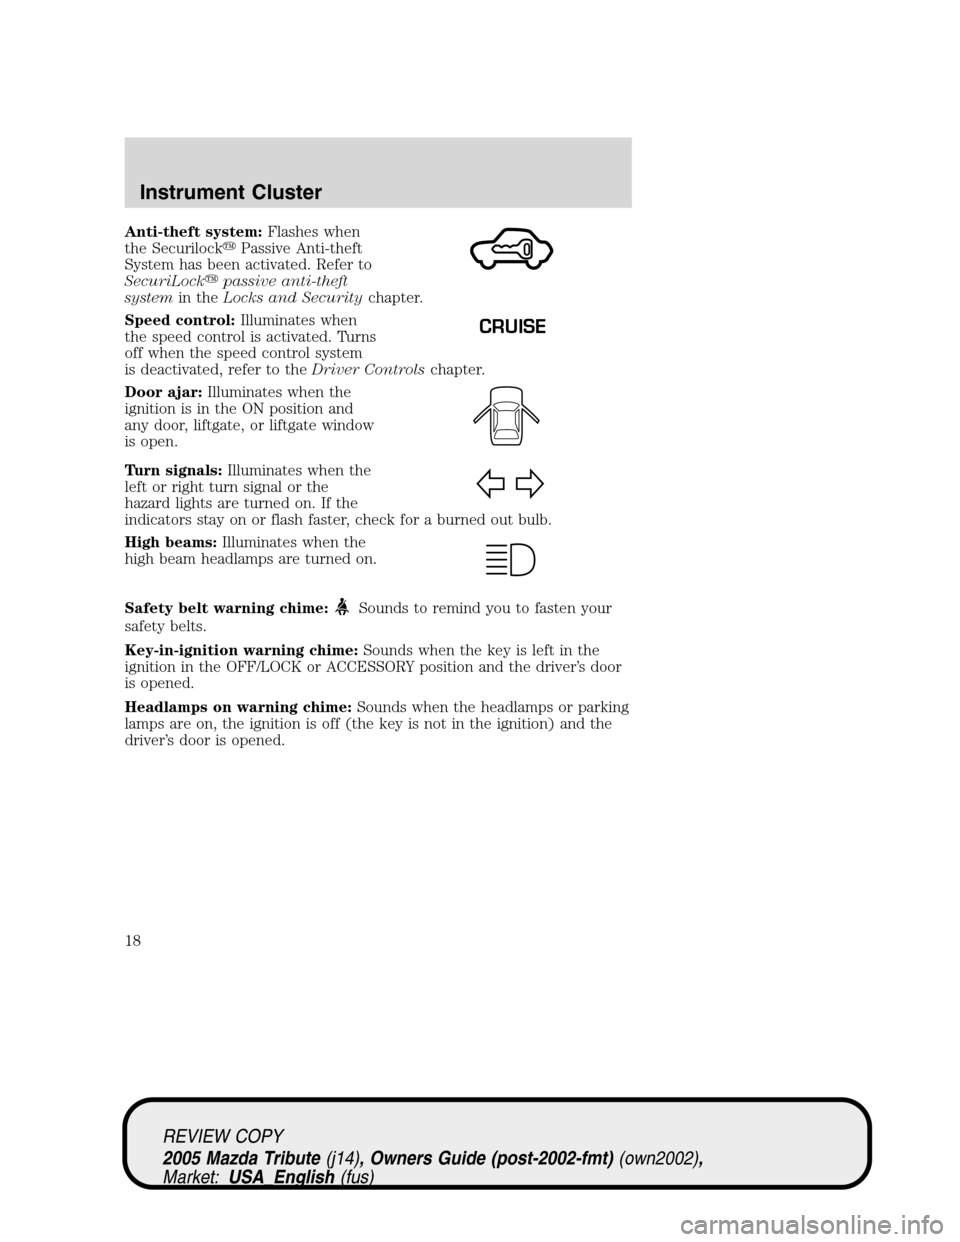 MAZDA MODEL TRIBUTE 2005  Owners Manual (in English) Anti-theft system:Flashes when
the SecurilockPassive Anti-theft
System has been activated. Refer to
SecuriLockpassive anti-theft
systemin theLocks and Securitychapter.
Speed control:Illuminates when